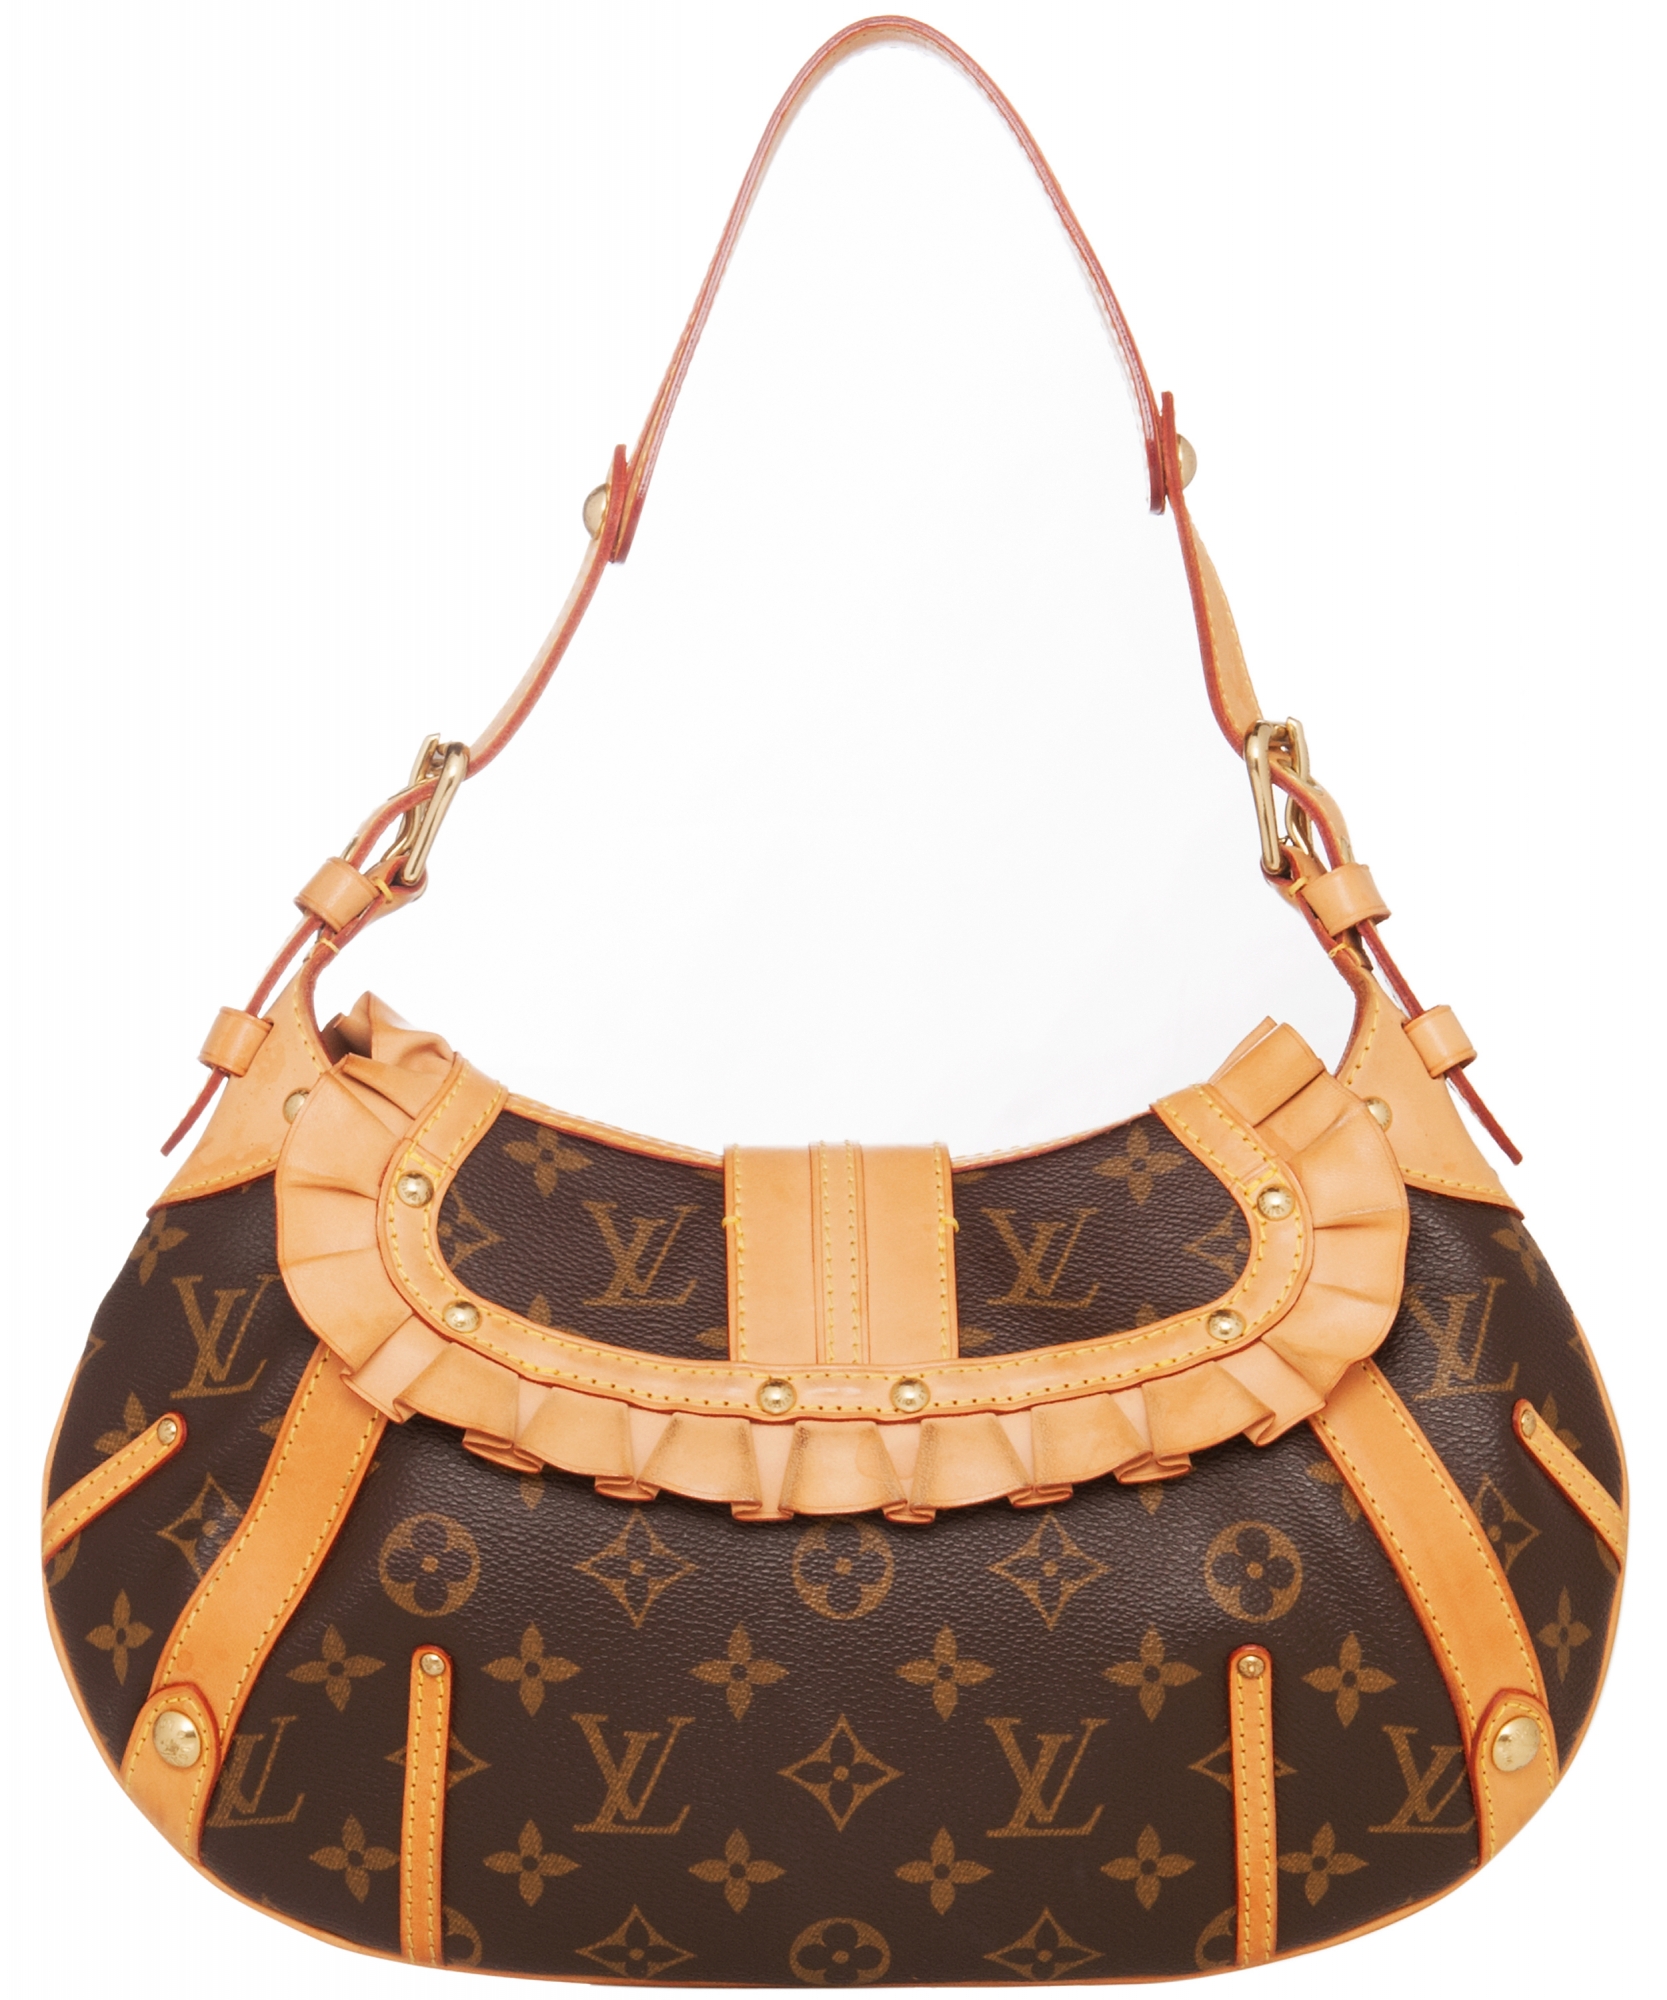 lv bag with buckle